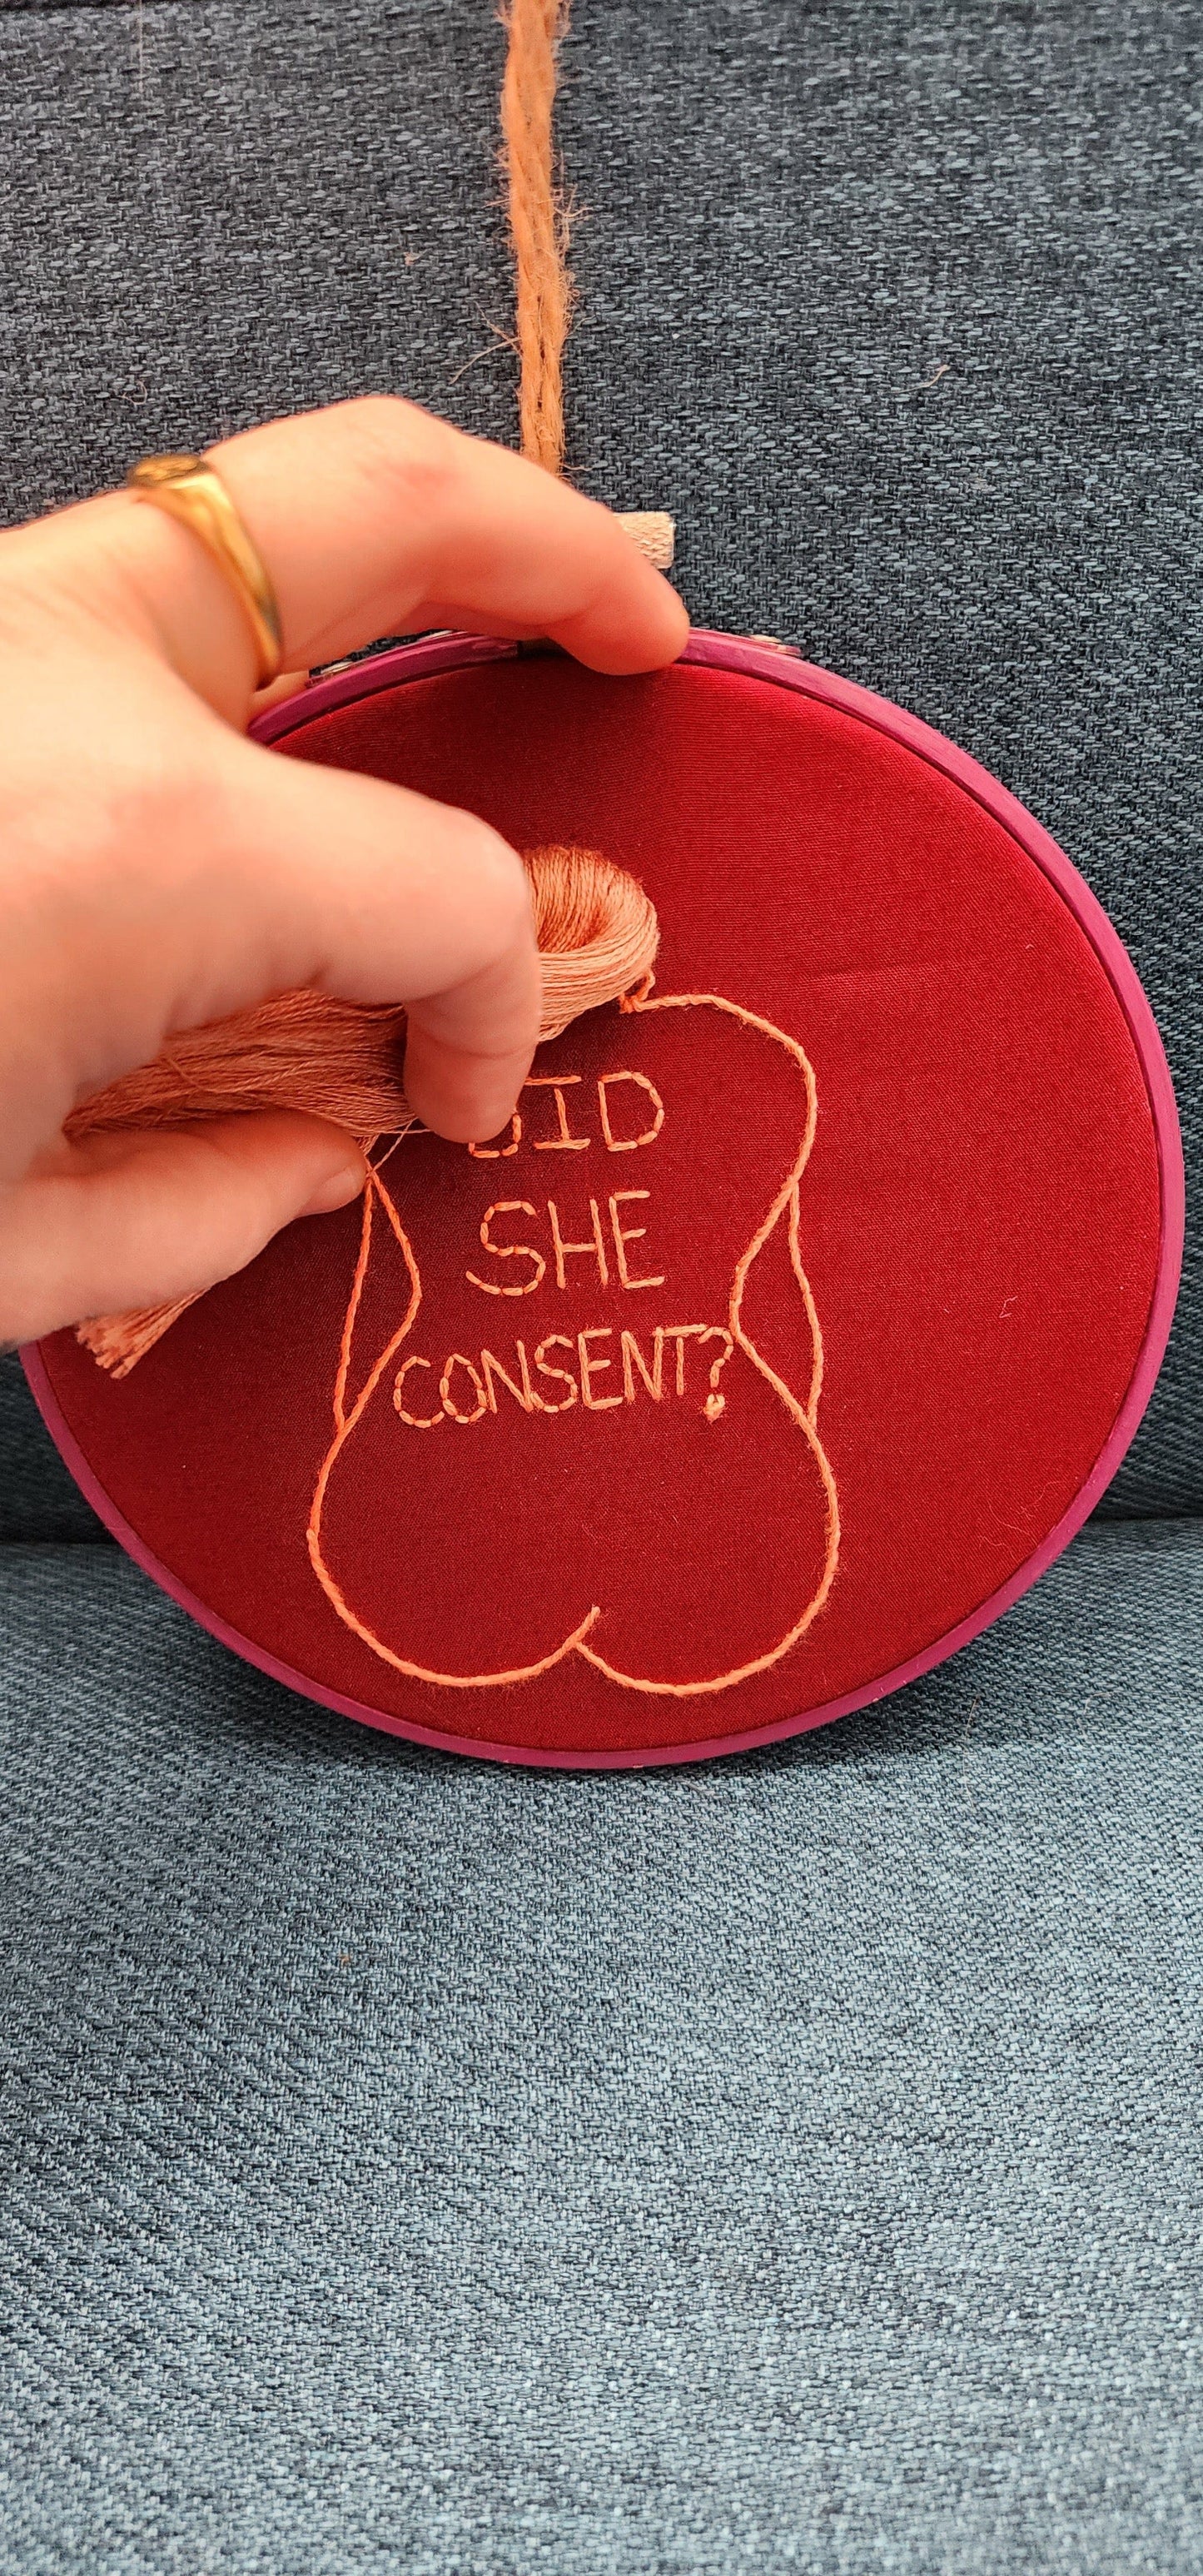 Embrace Embroidery "Did She Consent?"